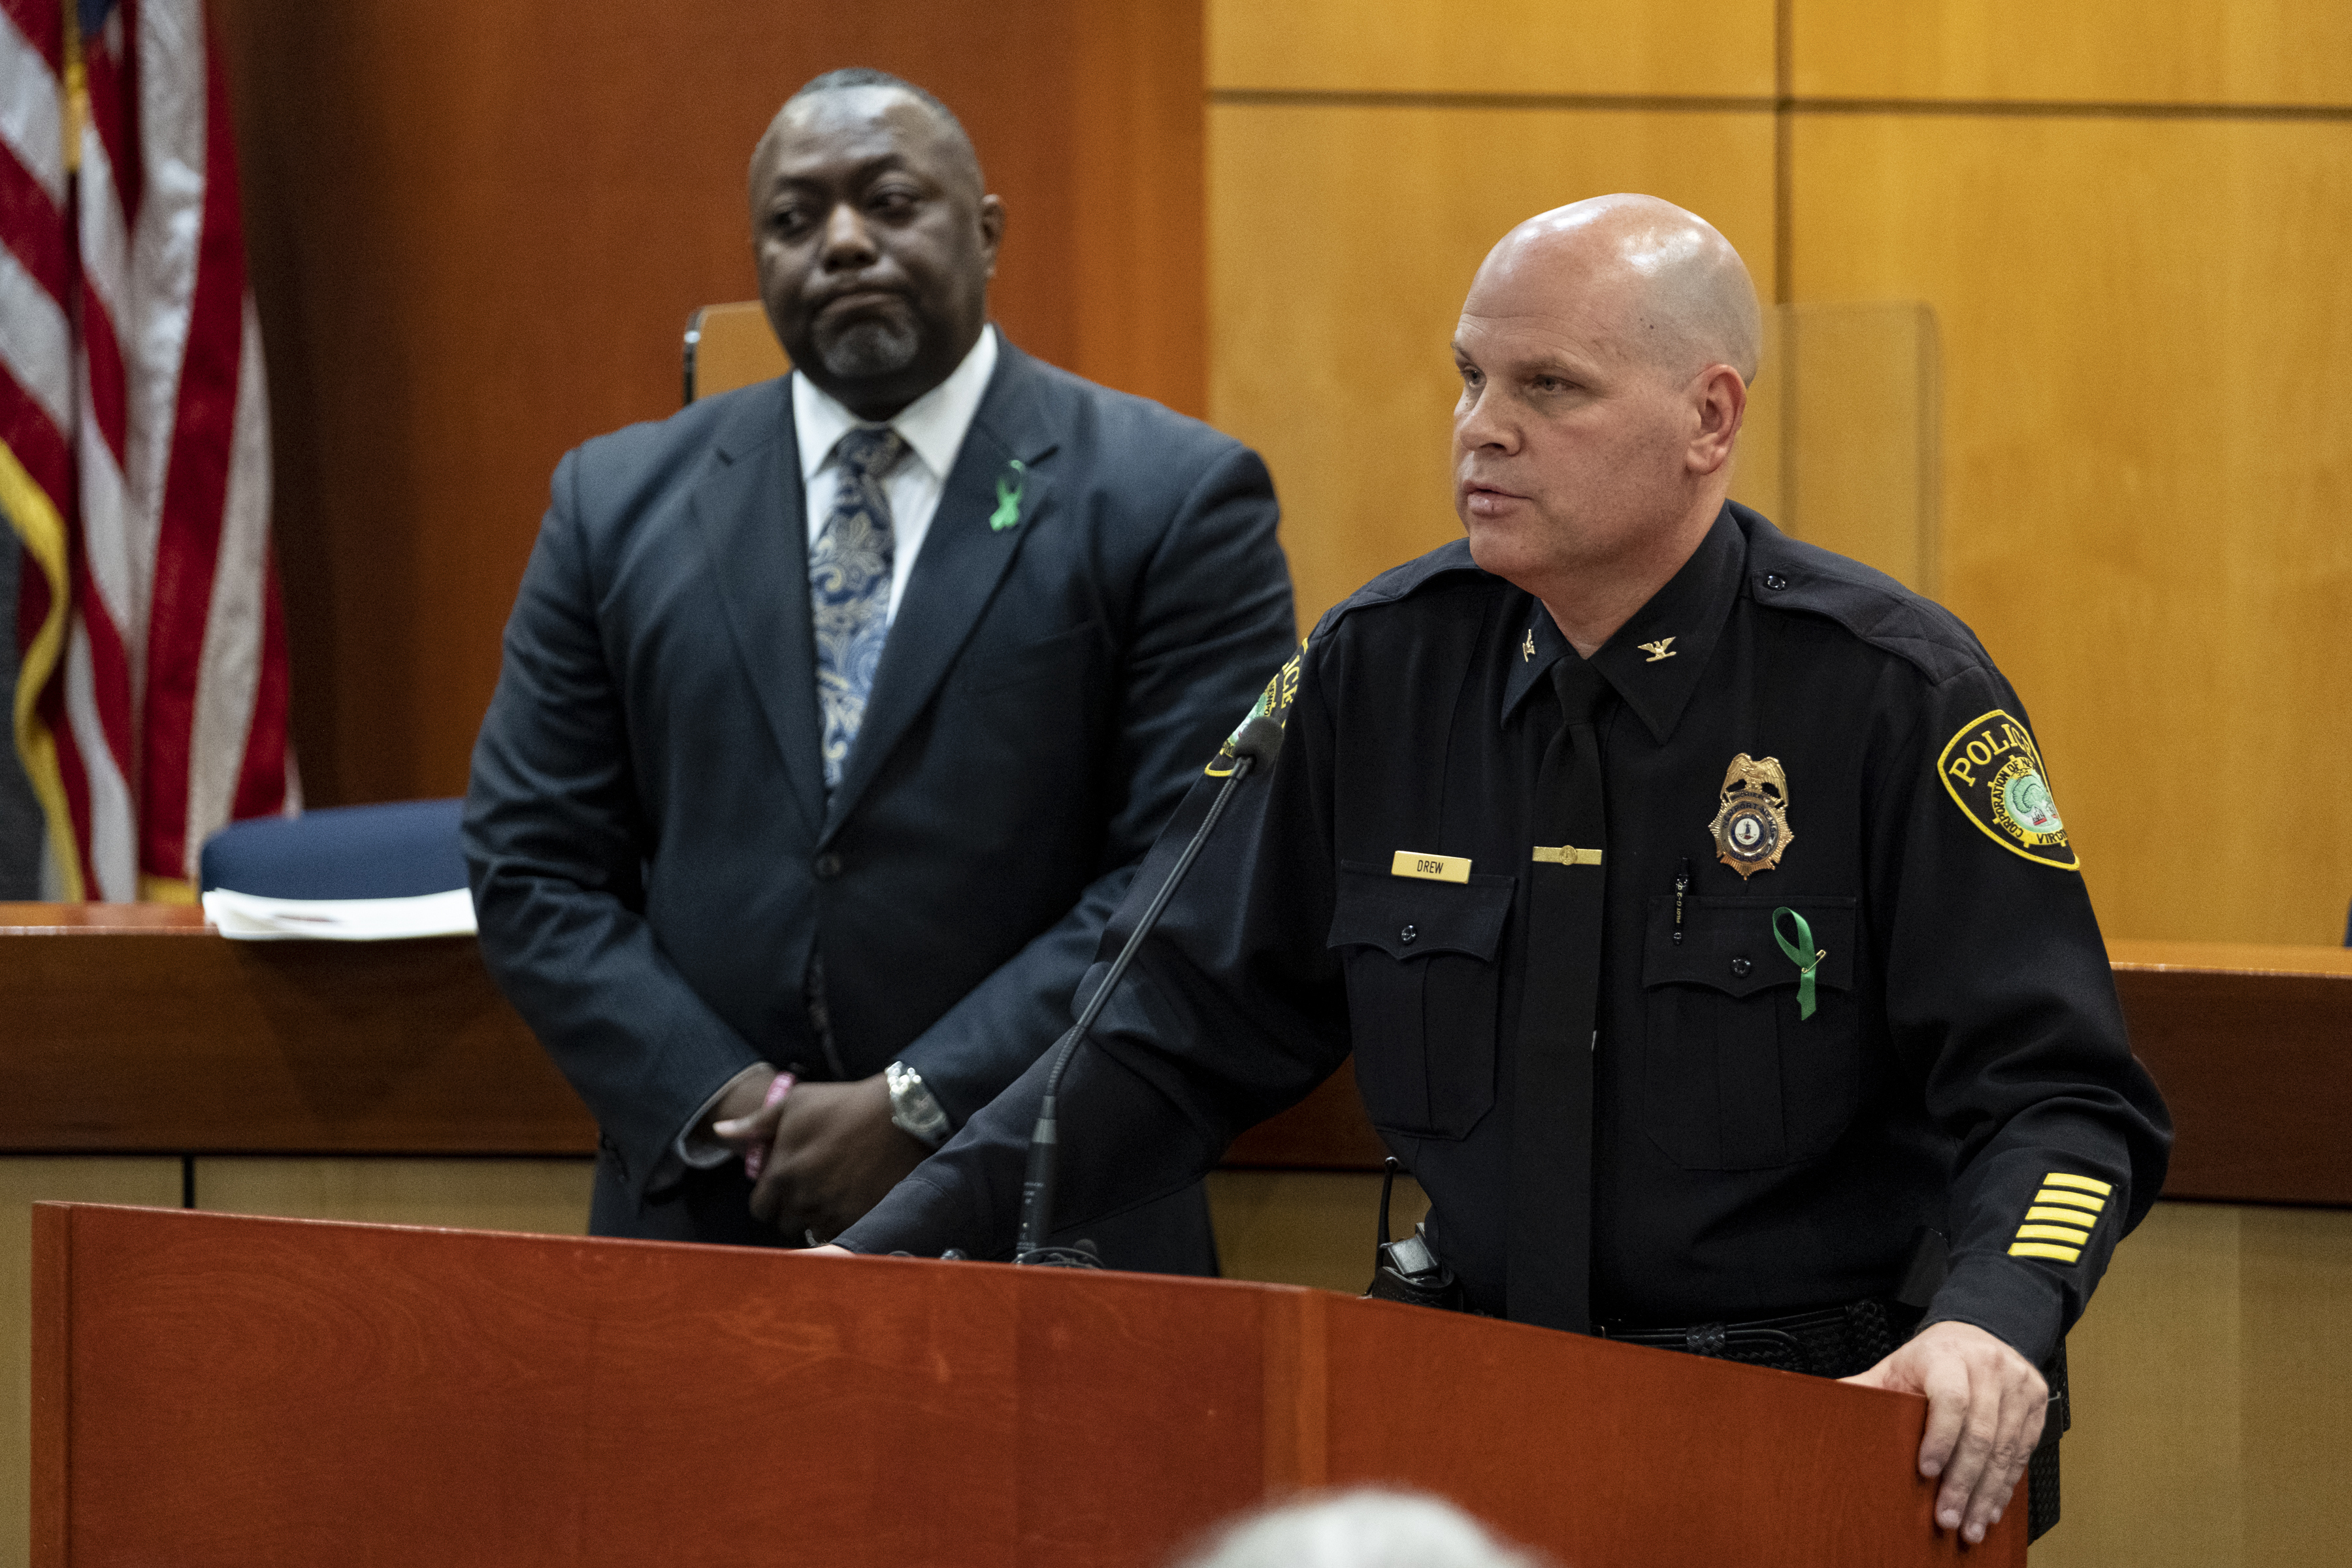 Newport News Chief of Police Steve Drew, right, and Newport News Superintendent George Parker answer questions regarding a teacher being shot by an armed 6-year-old at Richneck Elementary School during a press conference at the Newport News Public Schools Administration Building in Newport News, Va., on Monday, Jan. 9, 2023. 